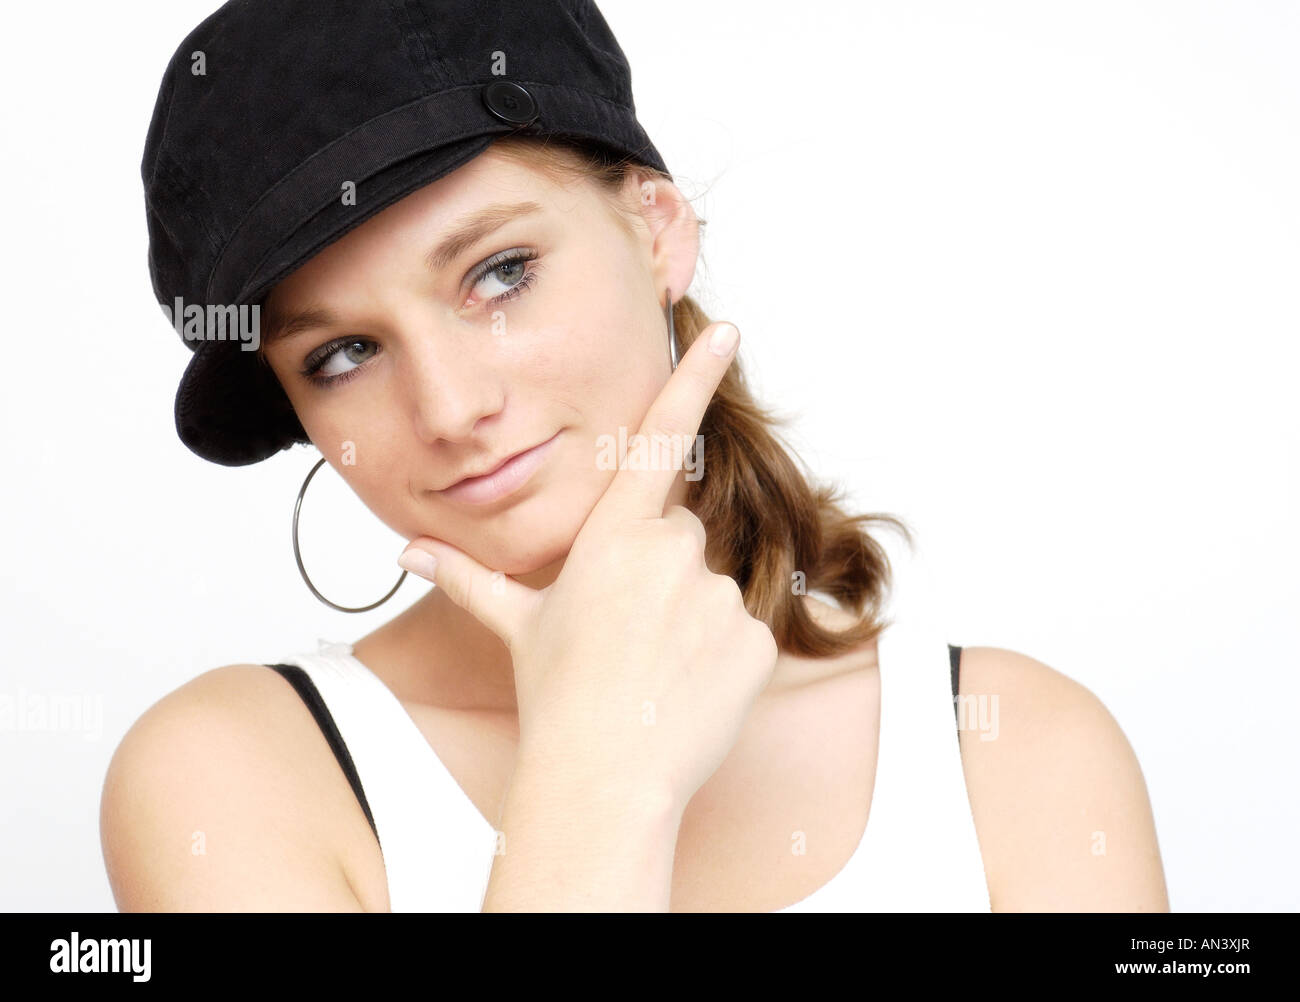 young woman with black cap Stock Photo